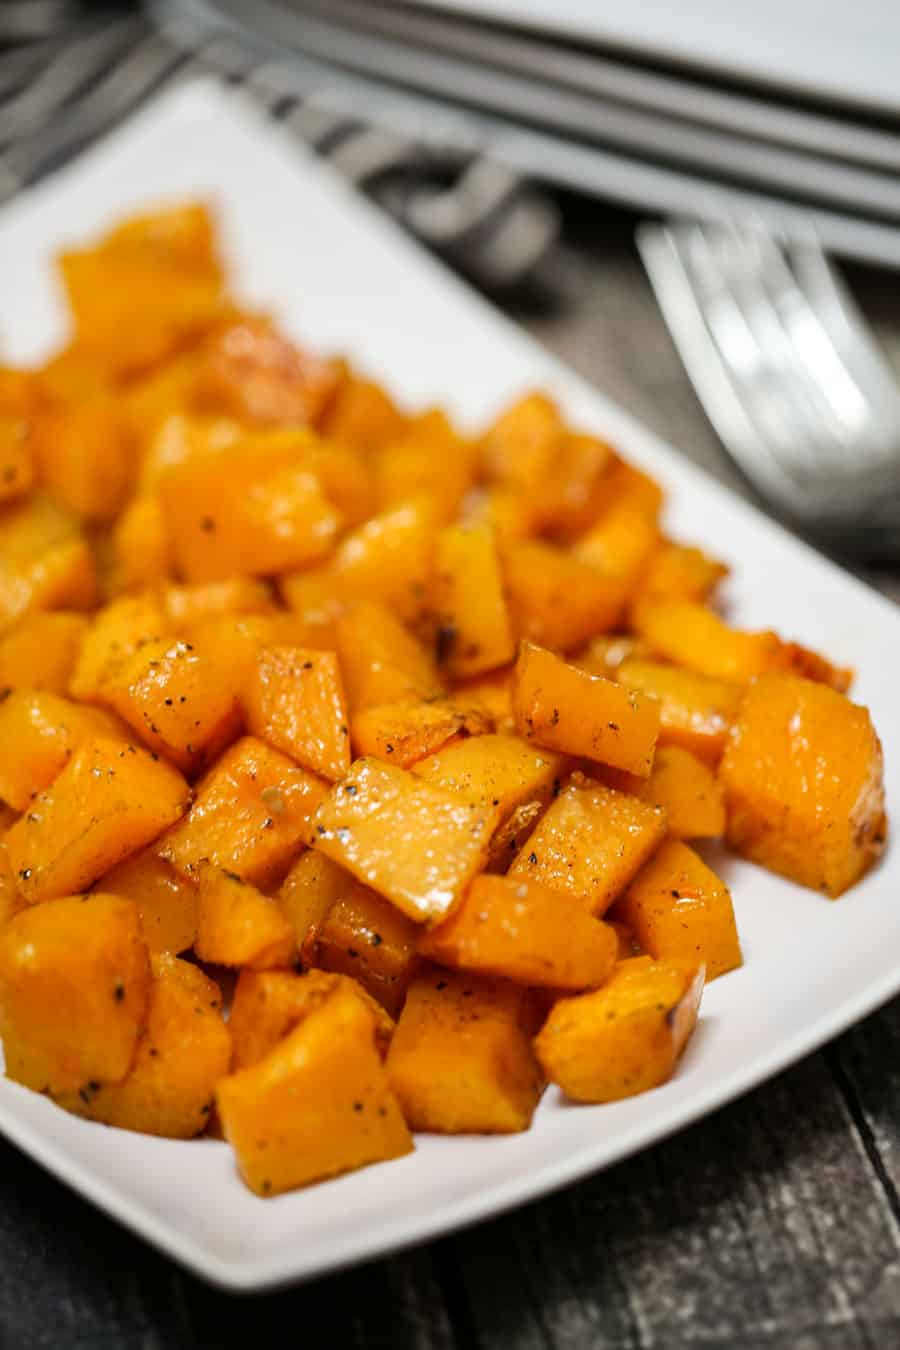 A close up of a plate of food, with Cinnamon and Squash